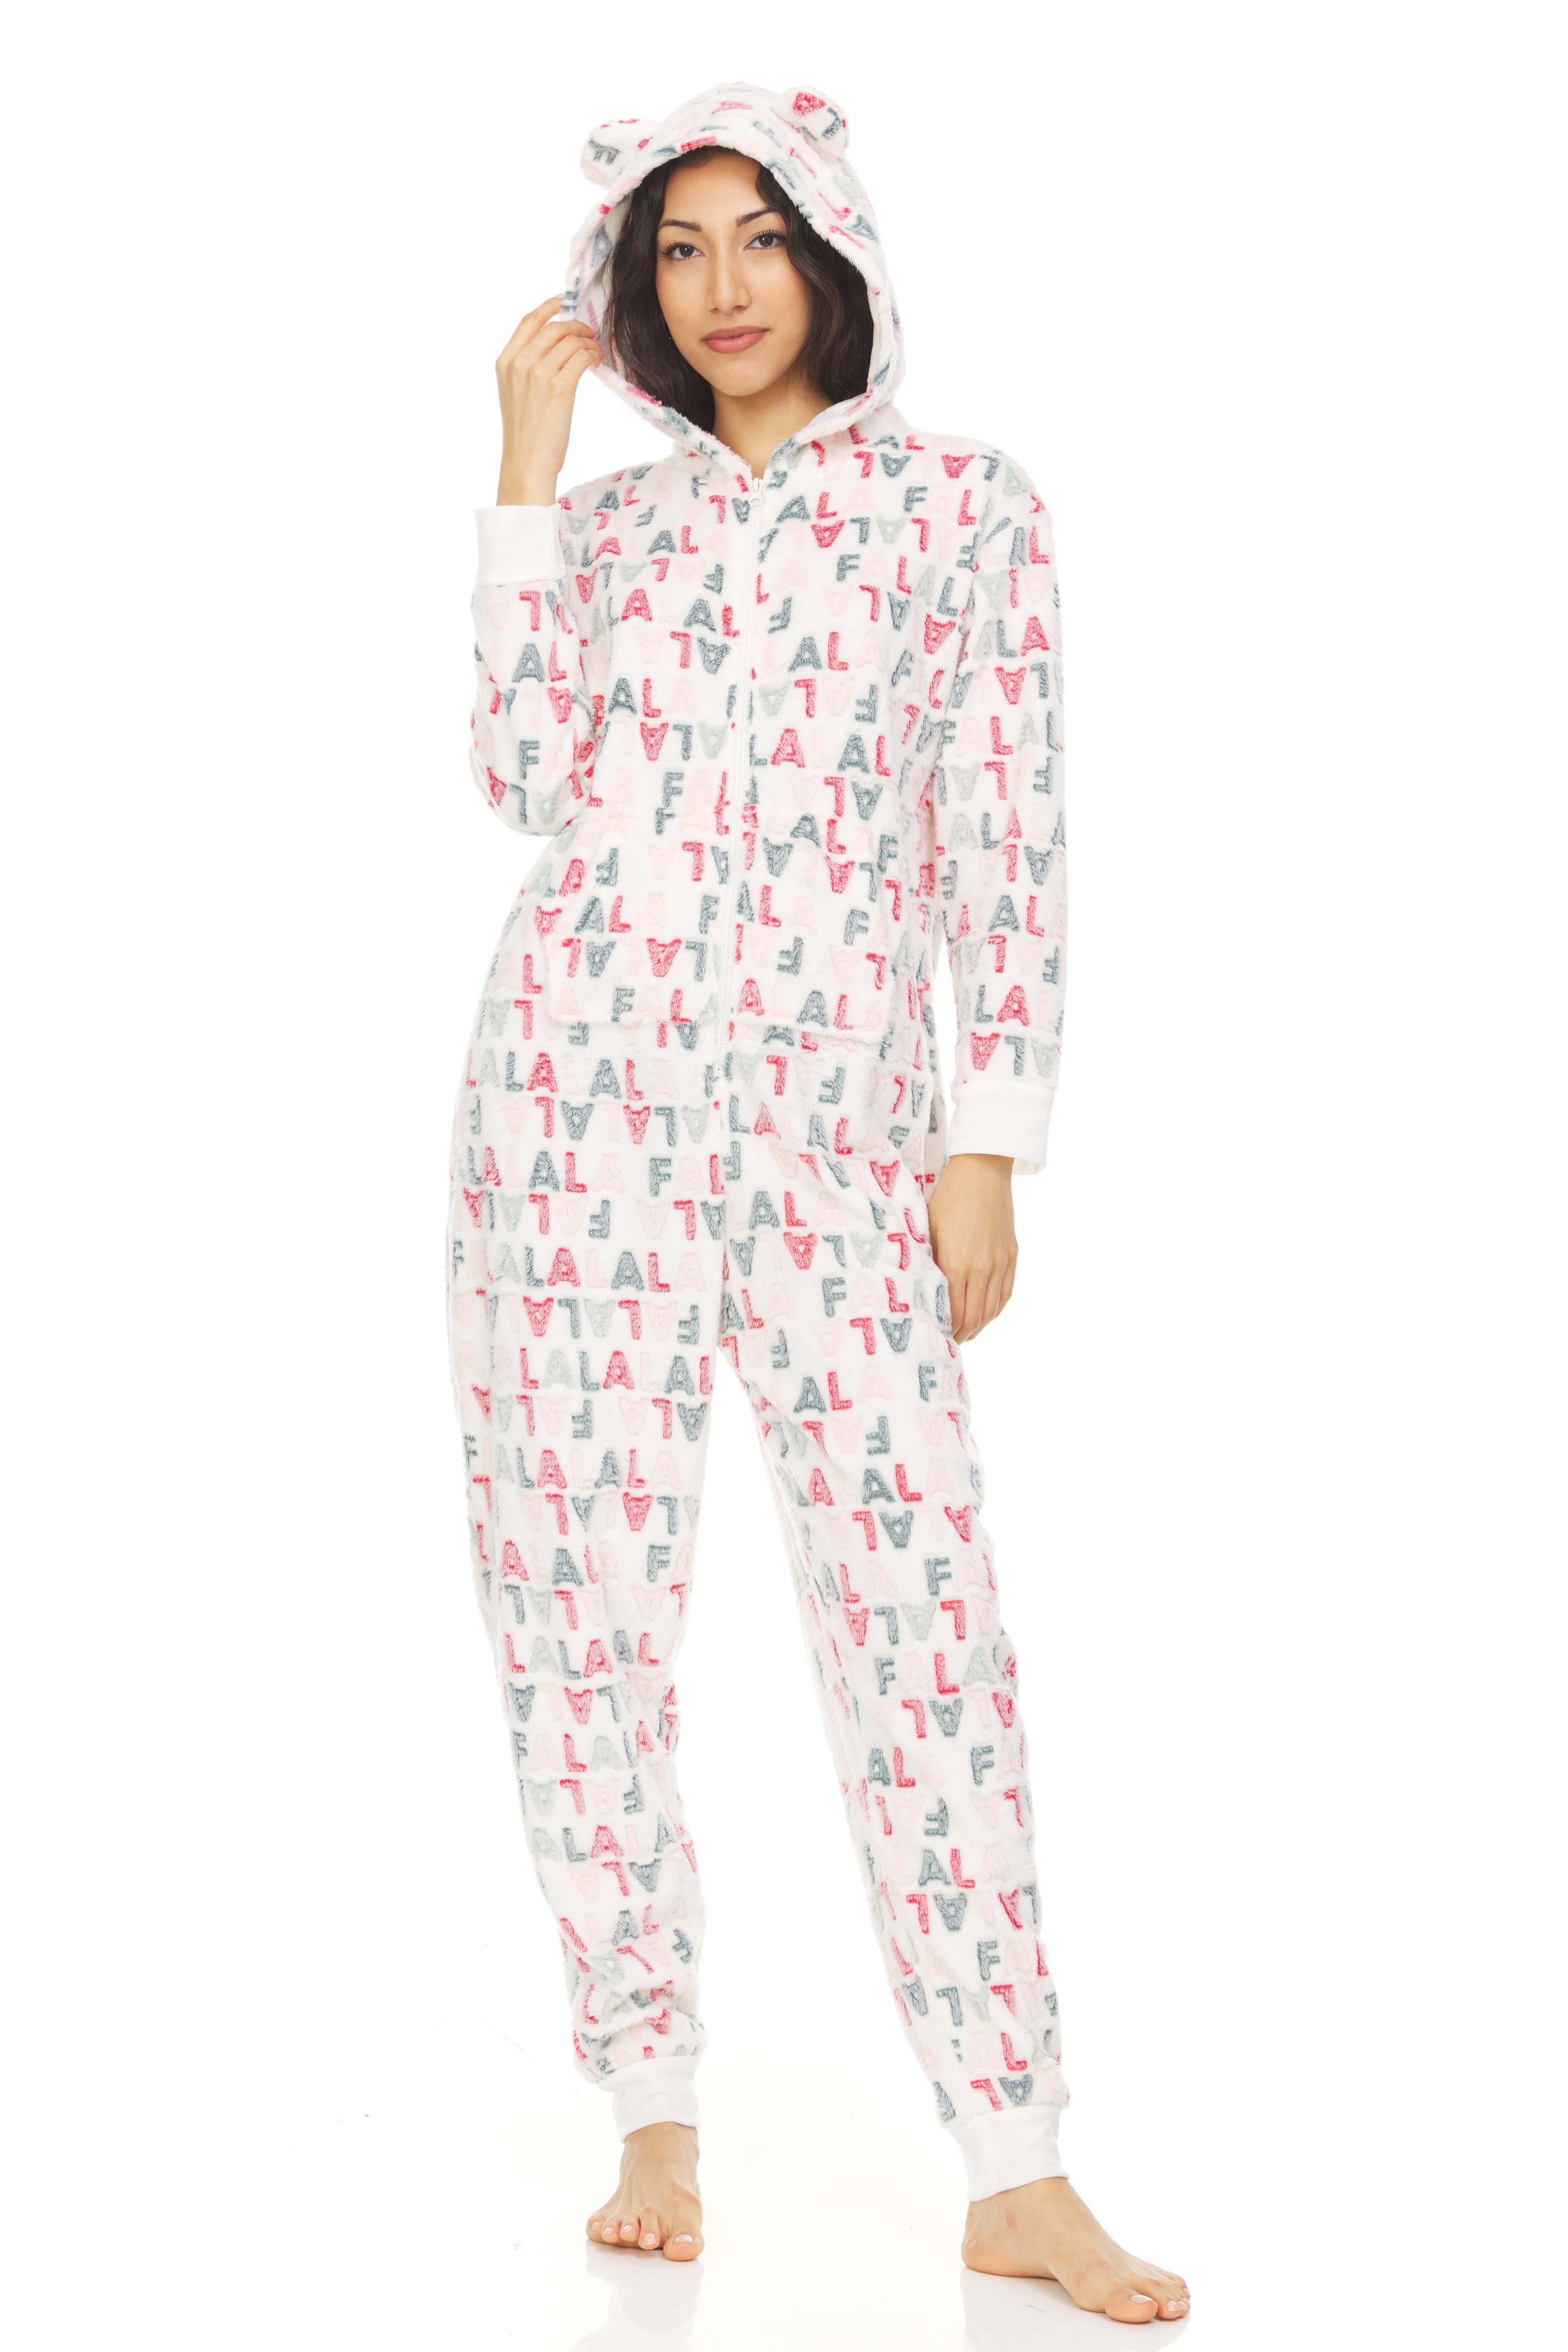 Buy Bearpaw Women's Onesie Fuzzy Pajamas with Fluffy Hoodie and Ears ...